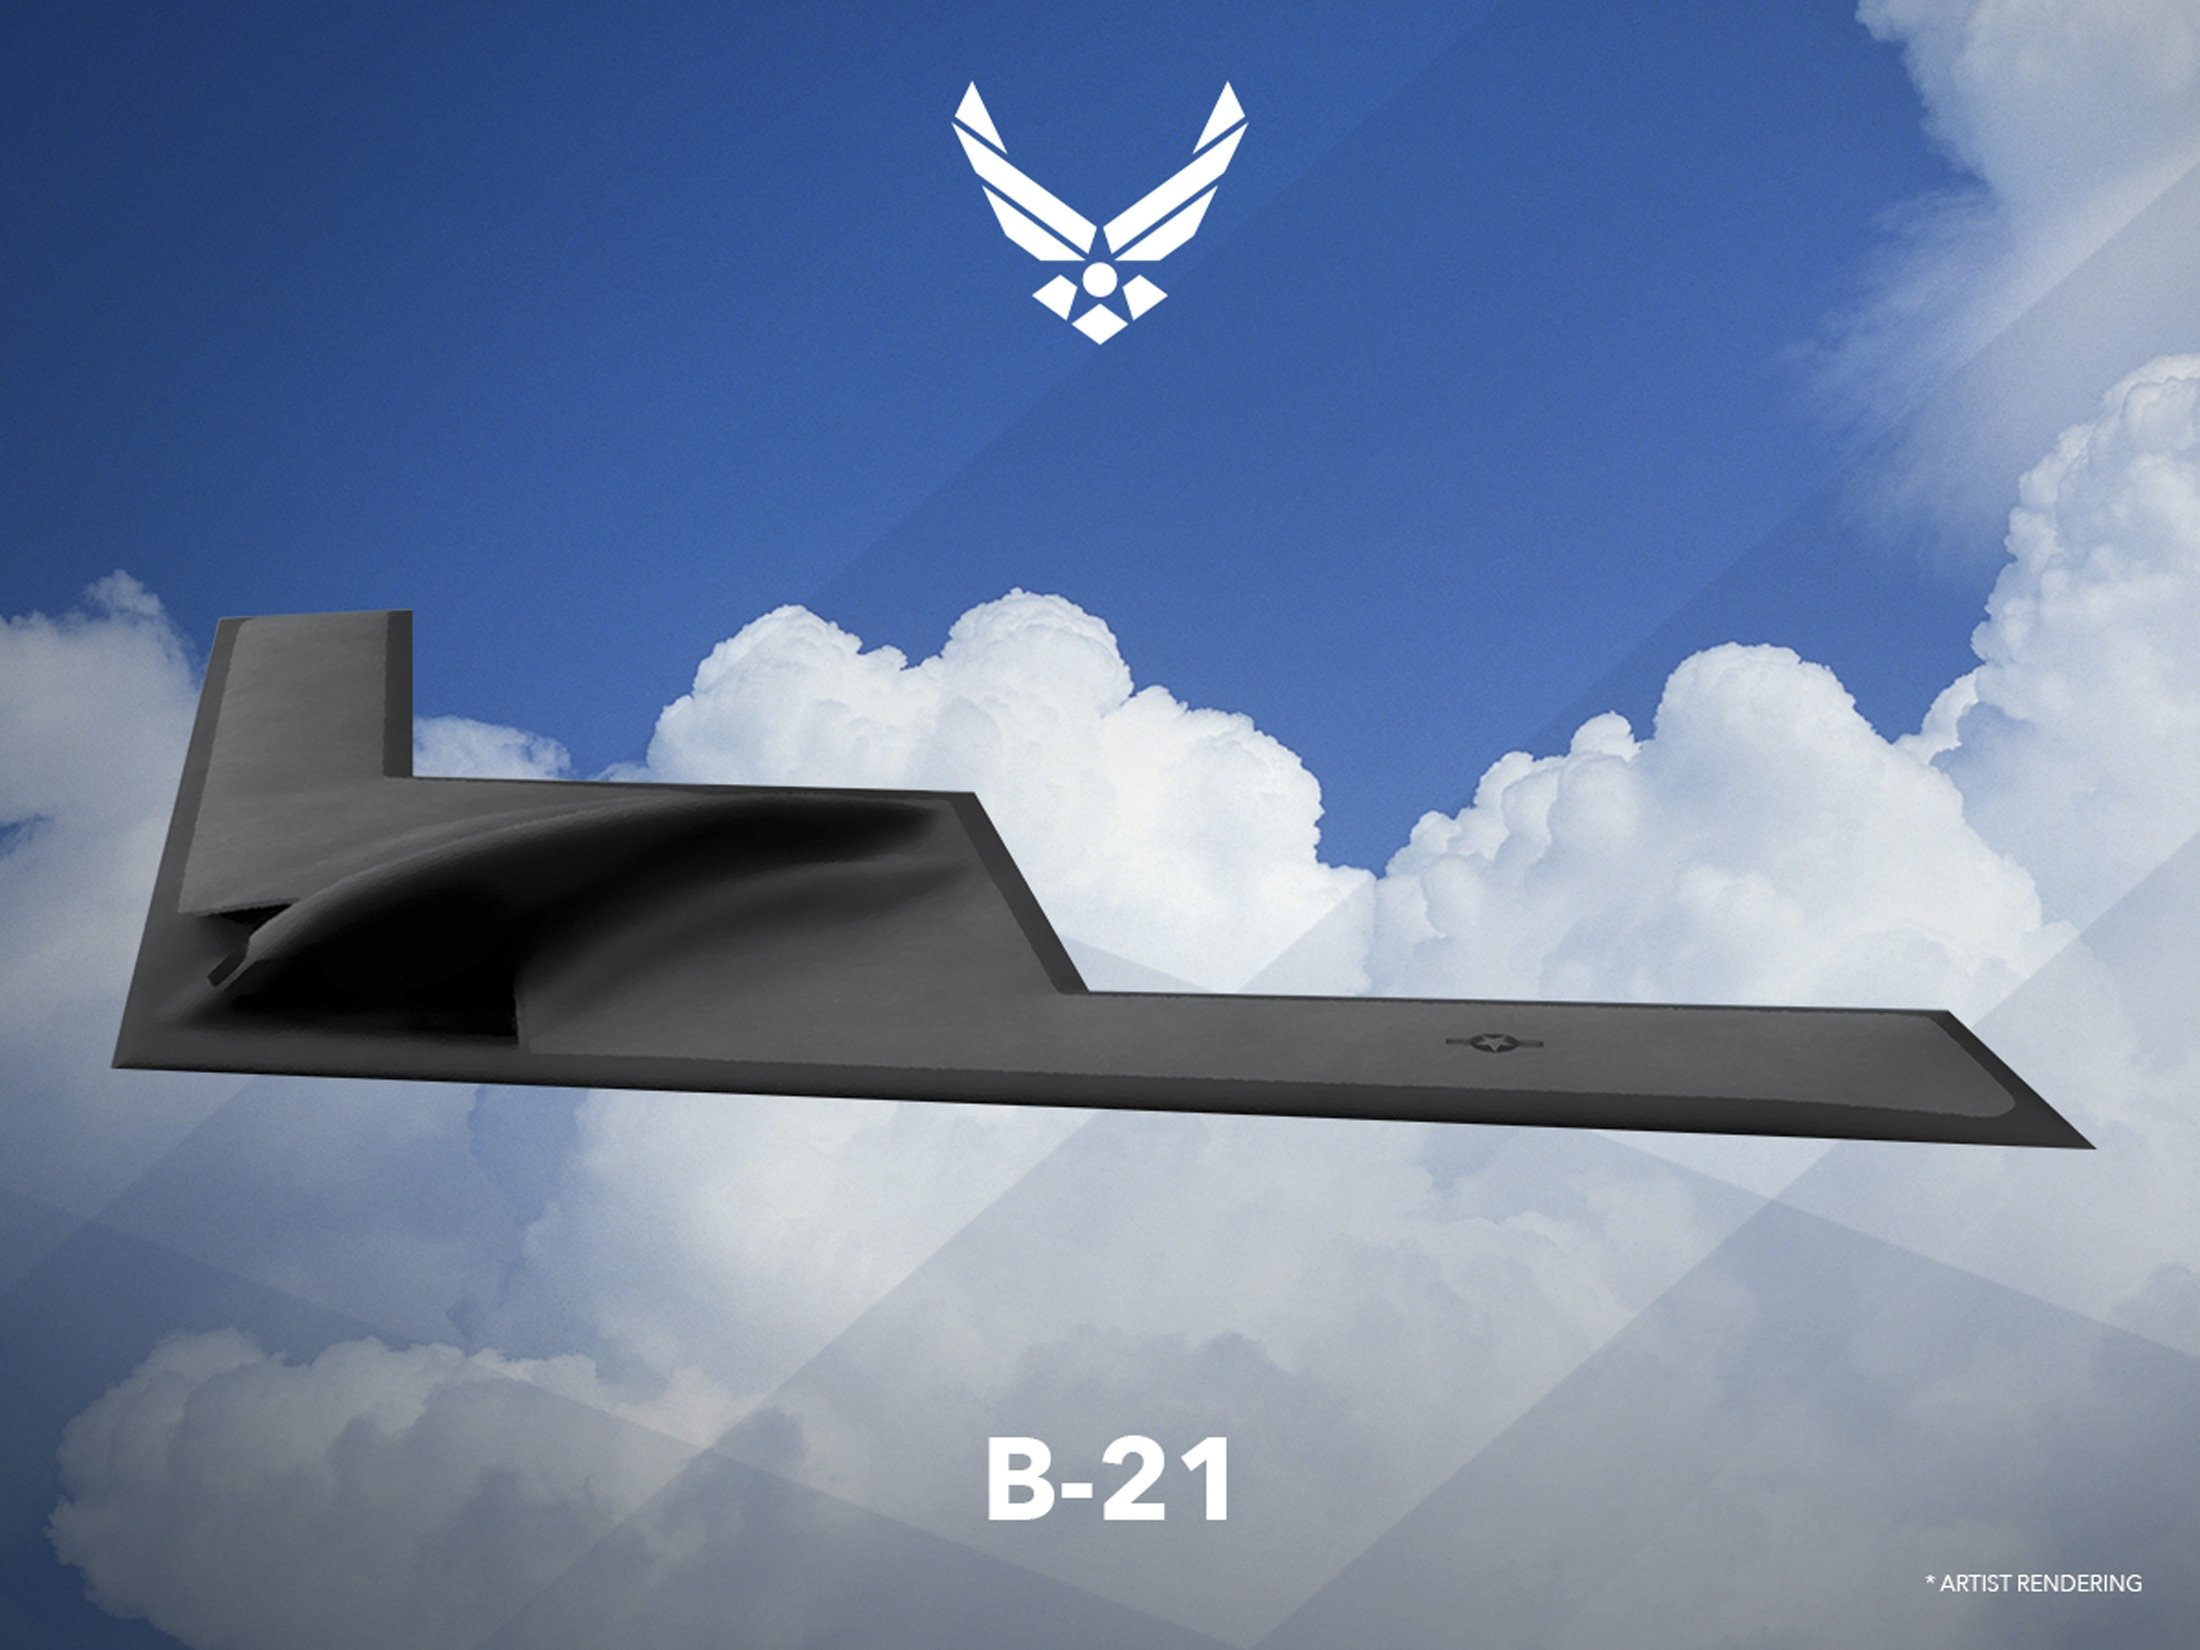 An artist rendering shows the first image of a new Northrop Grumman Corp long-range bomber B21, released on Feb. 26, 2016.